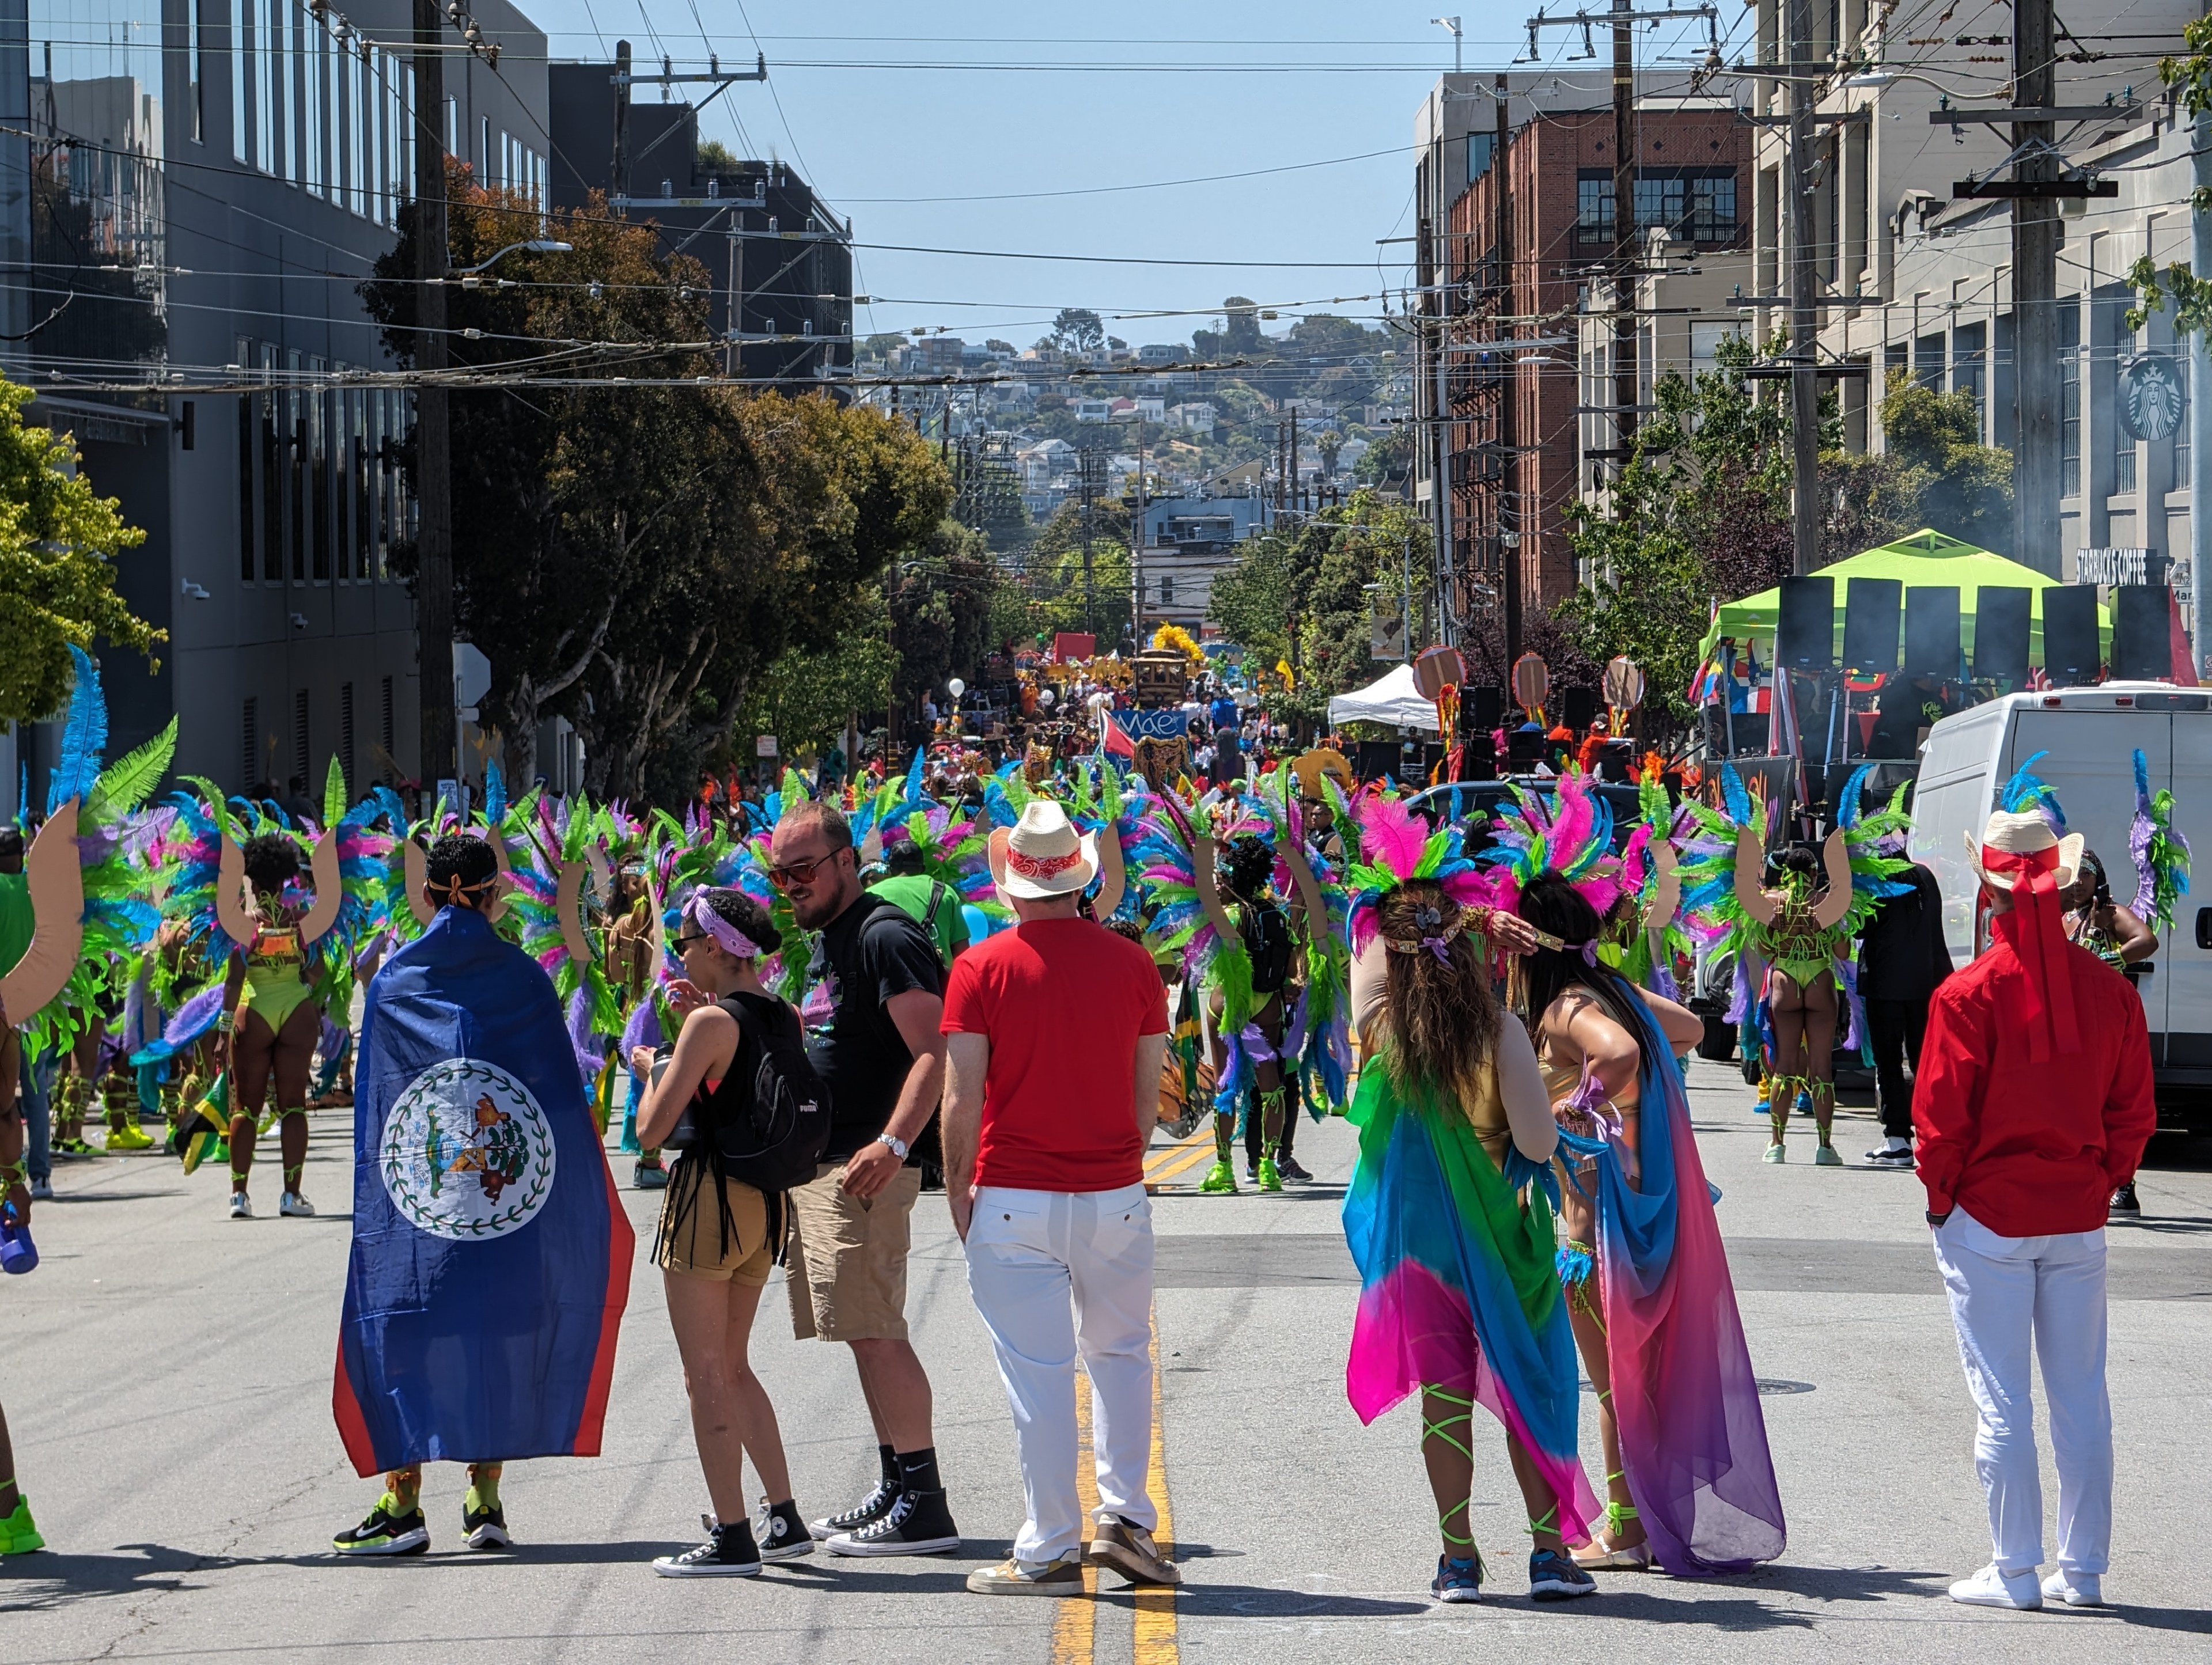 A group of eight people watch hundreds of other people wearing brightly colored outfits line several blocks of a city street during a parade.